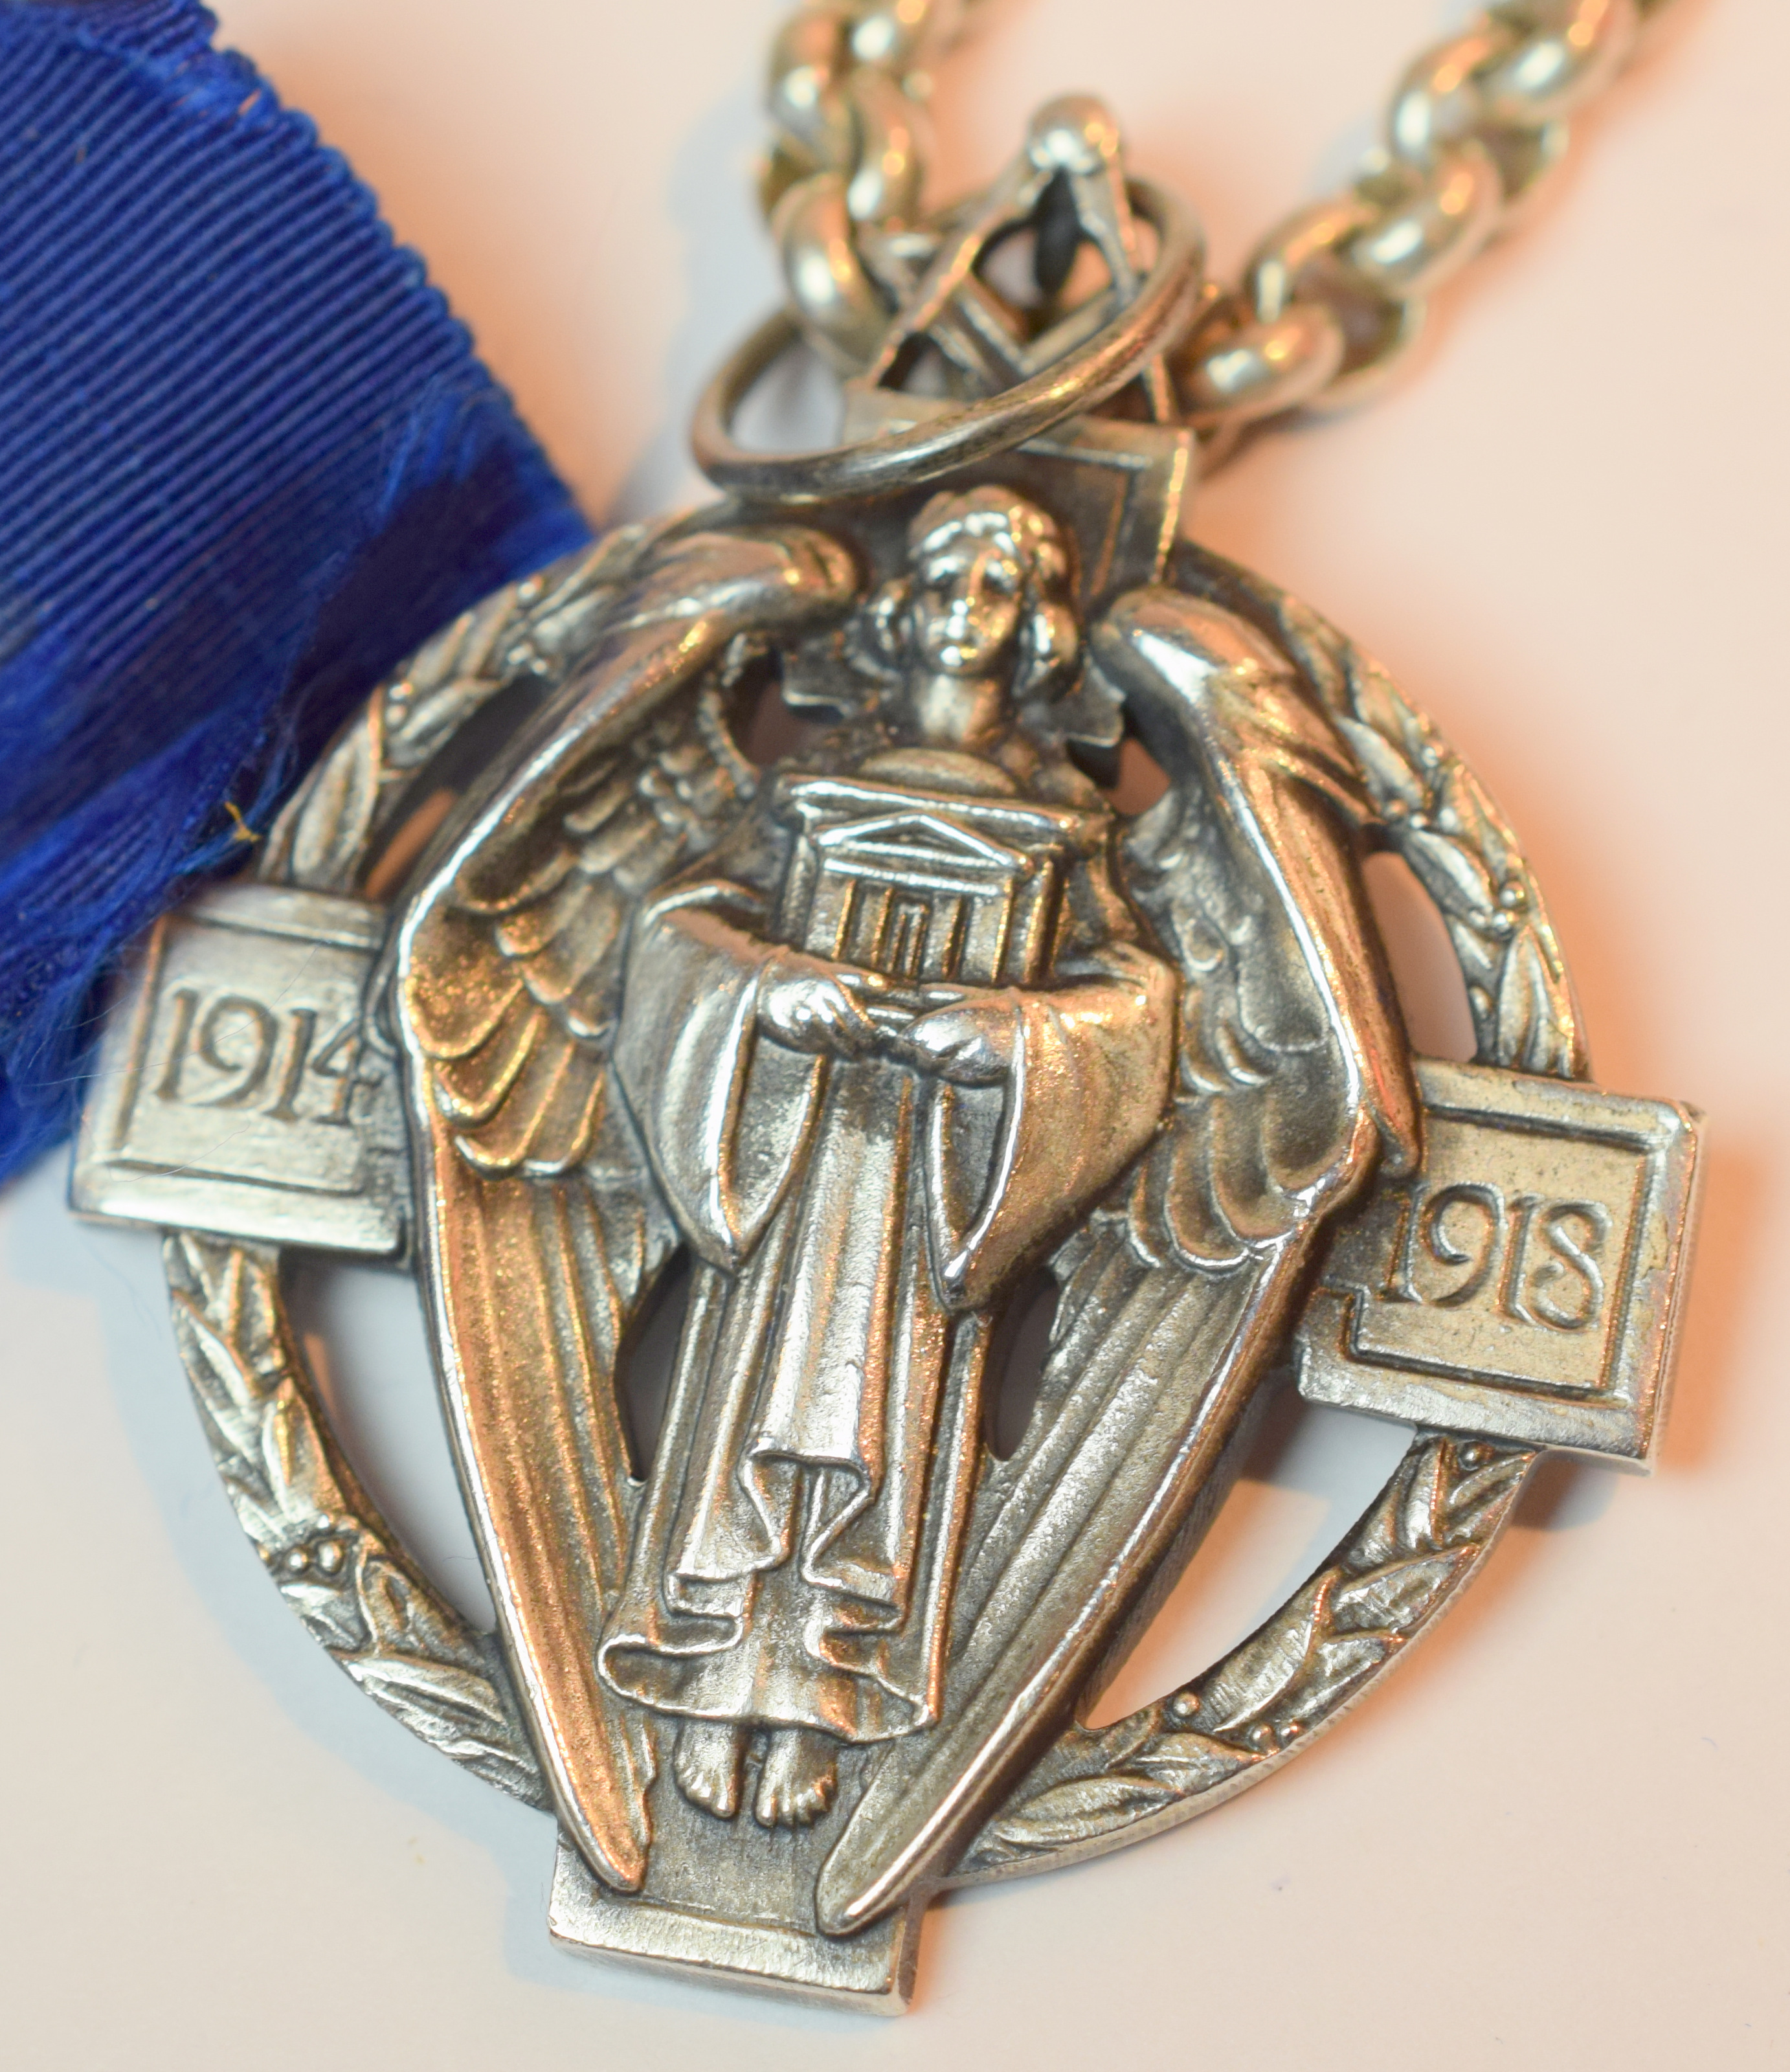 Masonic Silver Hall Stone jewel 1914-1918 On Silver Chain With Blue Ribbon   Masonic Silver Hall - Image 2 of 6